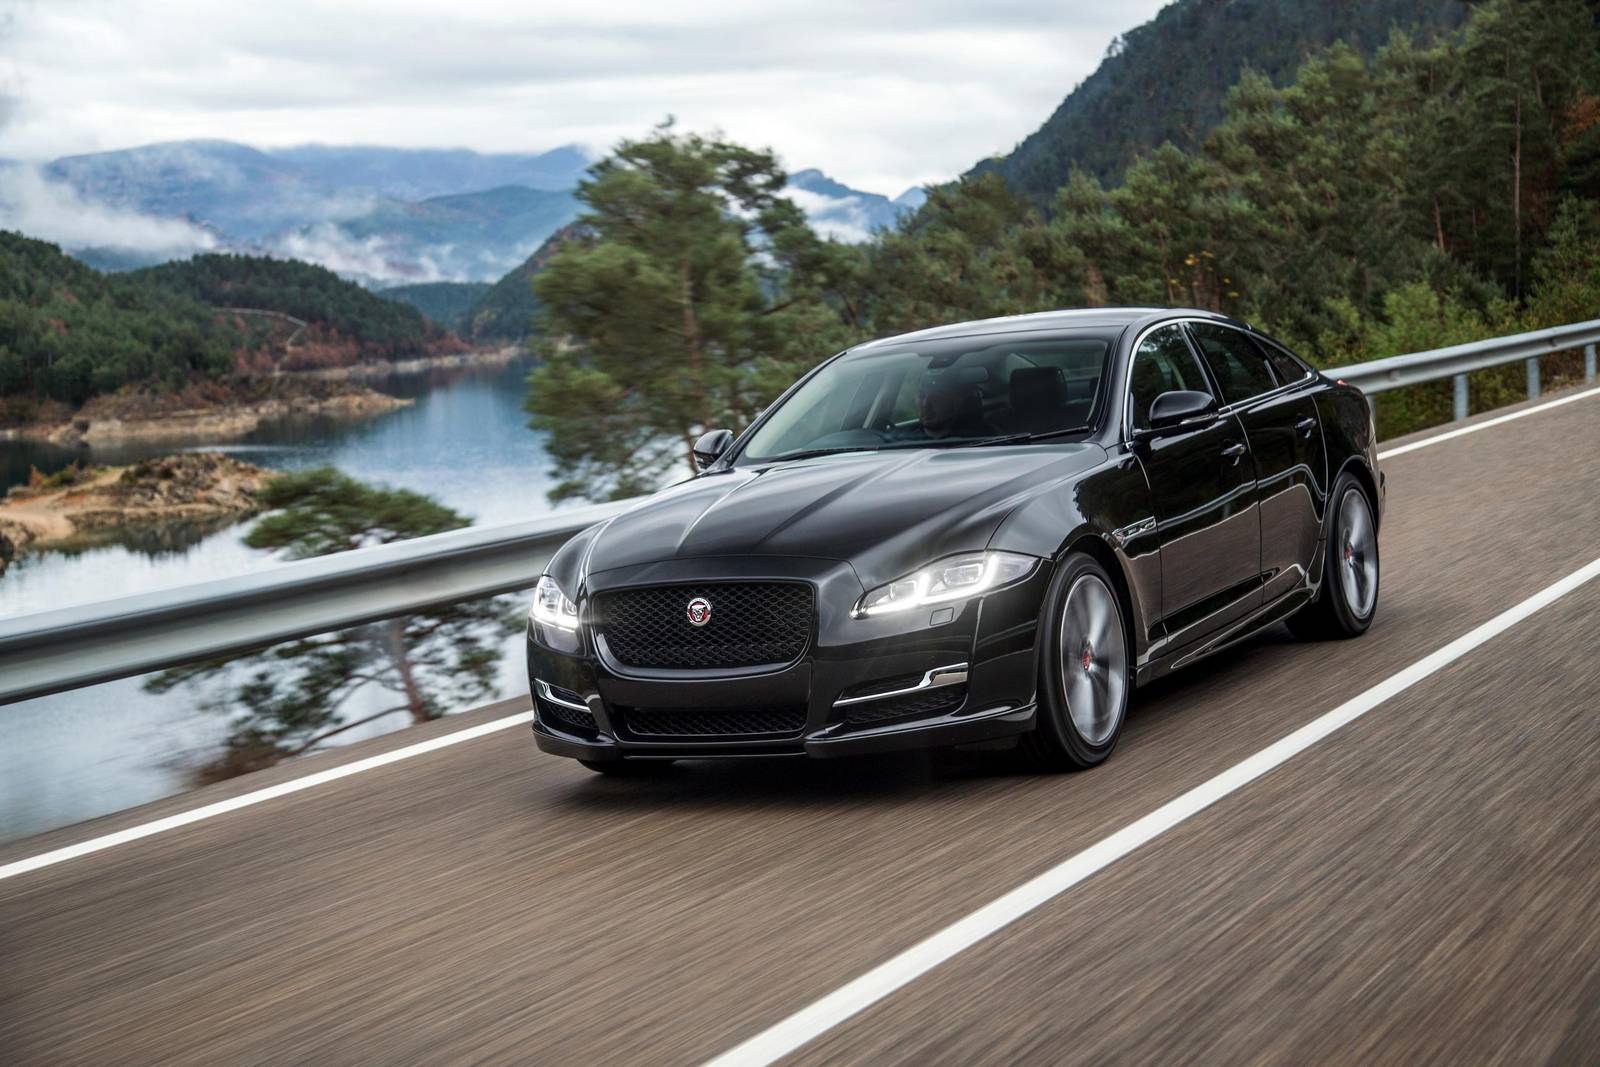 Jaguar Xj To Be Replaced With New Model Gtspirit